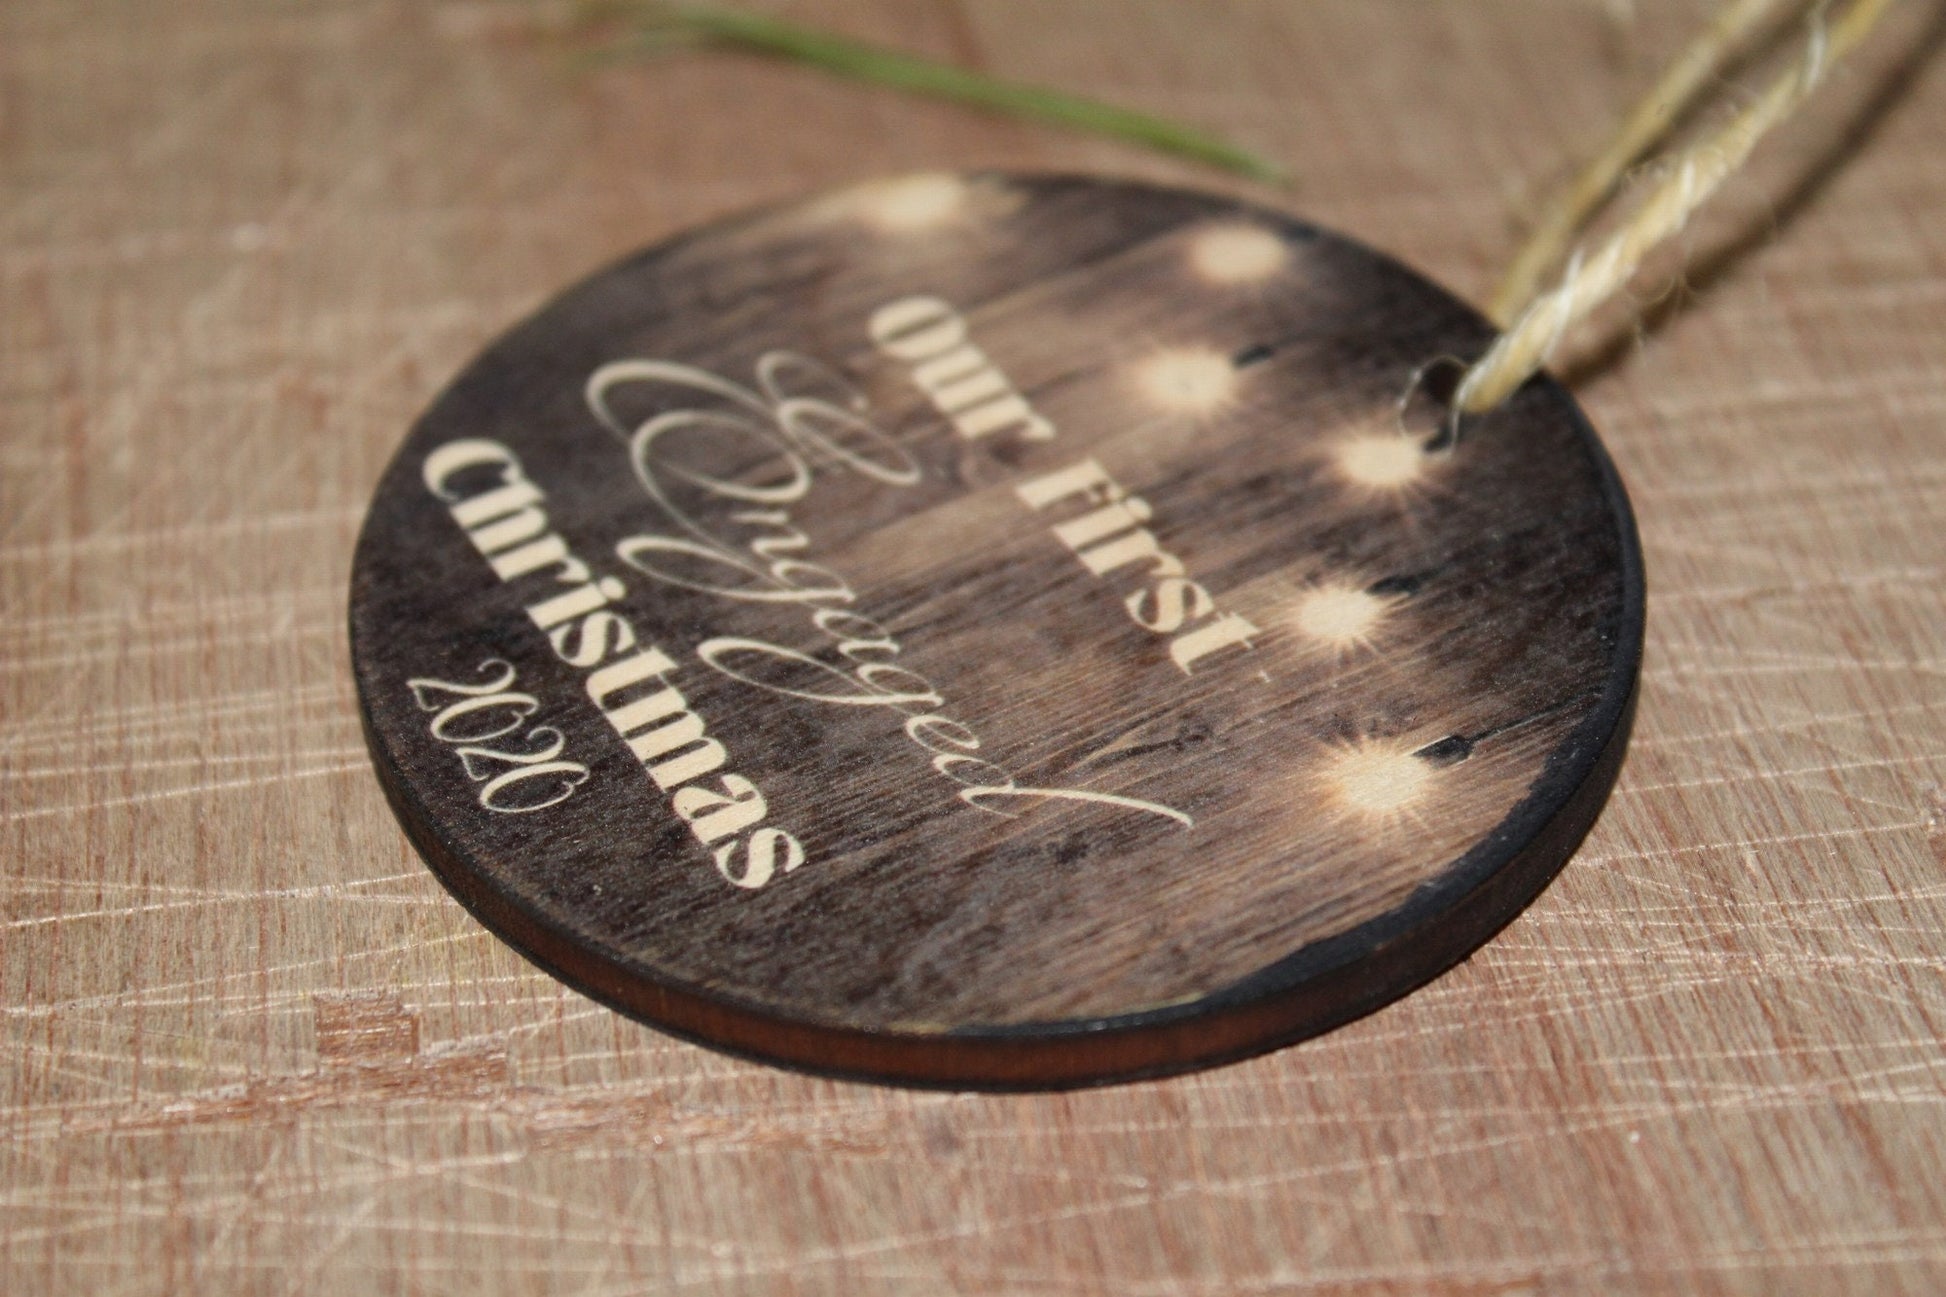 Engaged Celebrate Ornament Our First Christmas Engaged Wood Slice Christmas Tree Primitive Rustic Tree Printed Light Bulb Barn Wood